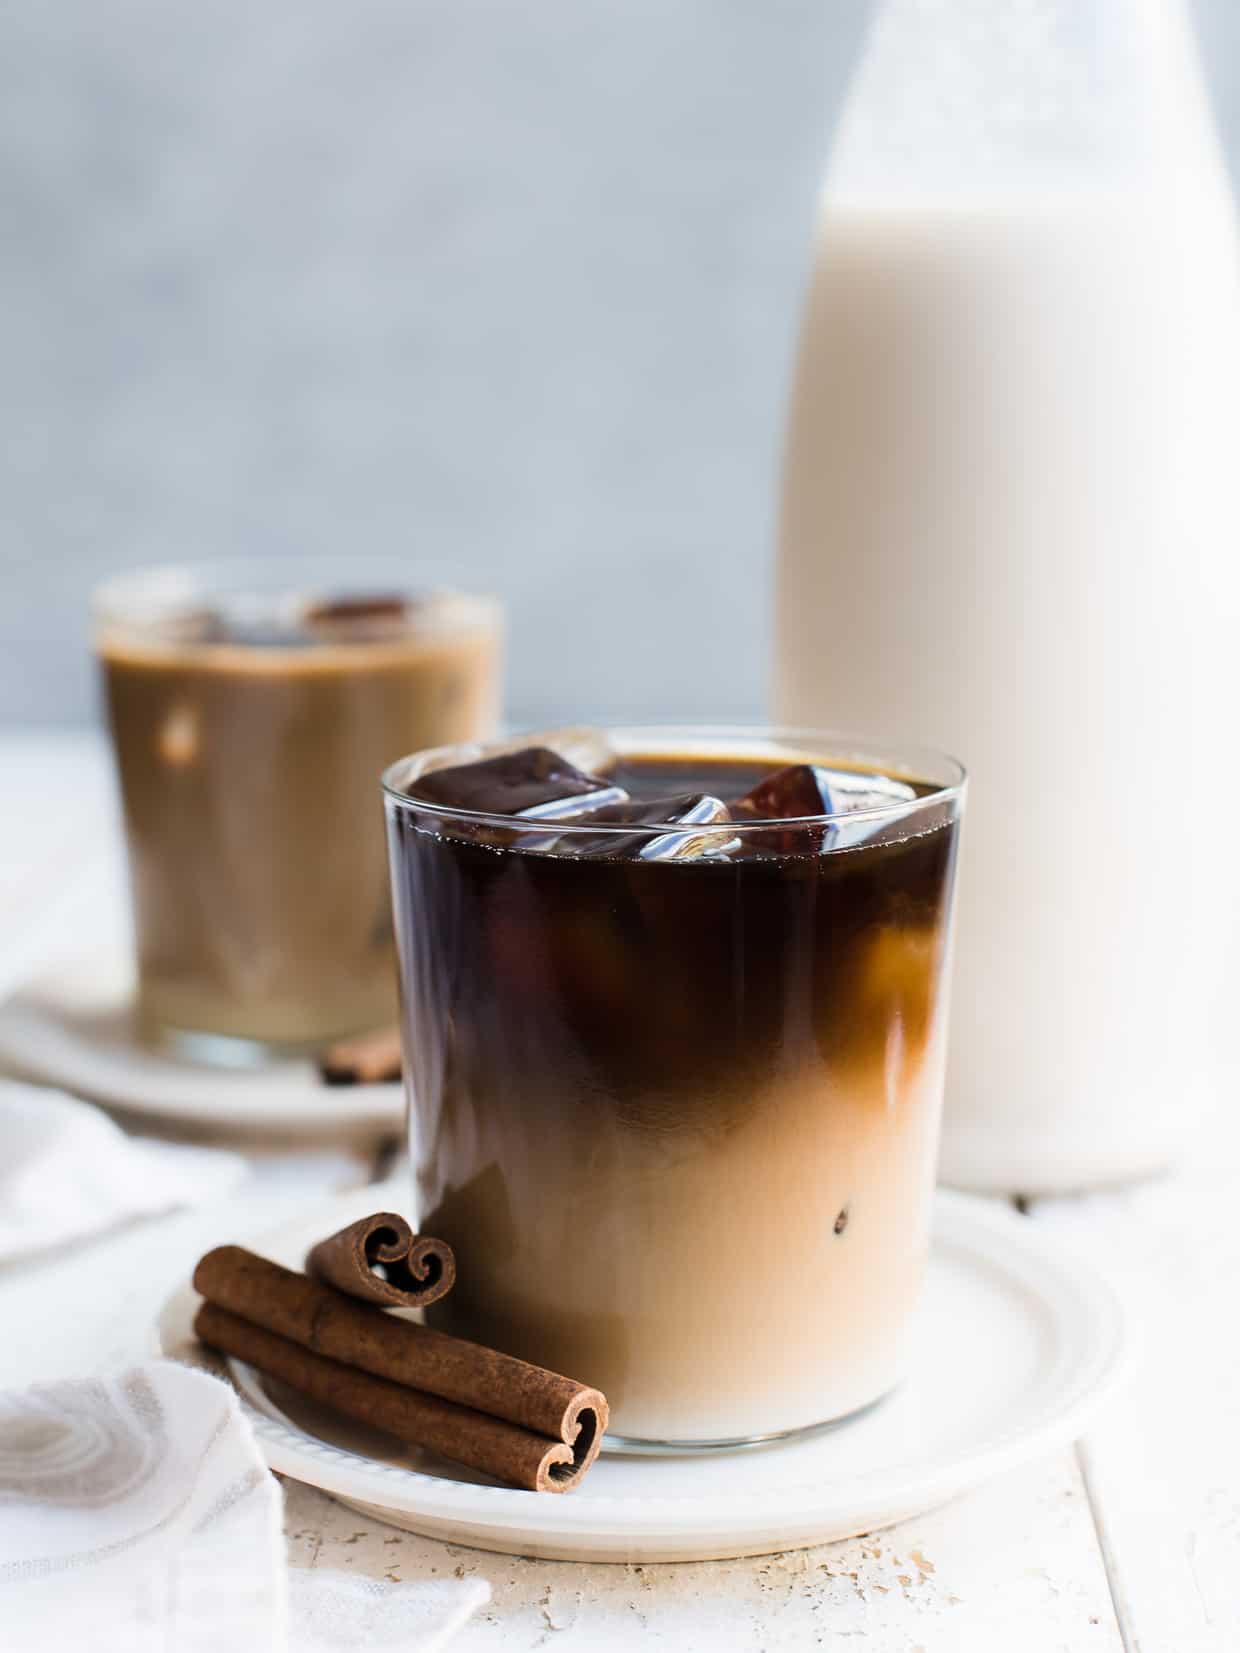 My favorite mid-day drink: homemade iced latte - The Small Things Blog